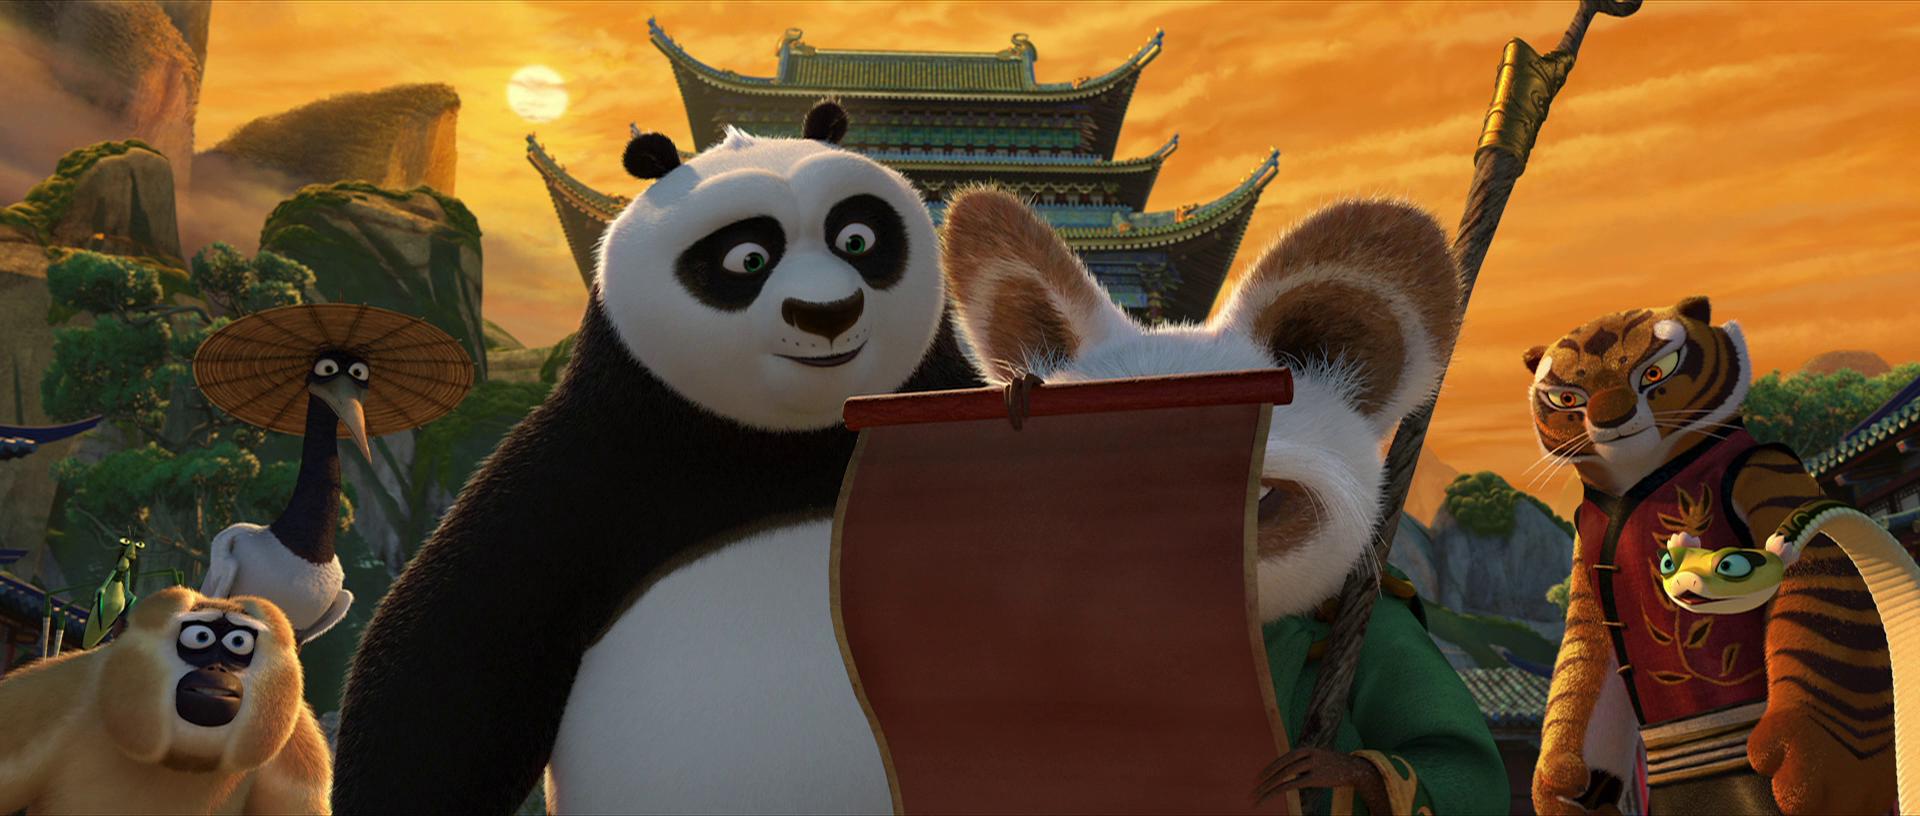 Moviery.com - Download the Movie Kung Fu Panda 2 Online in HD, DVD, DivX